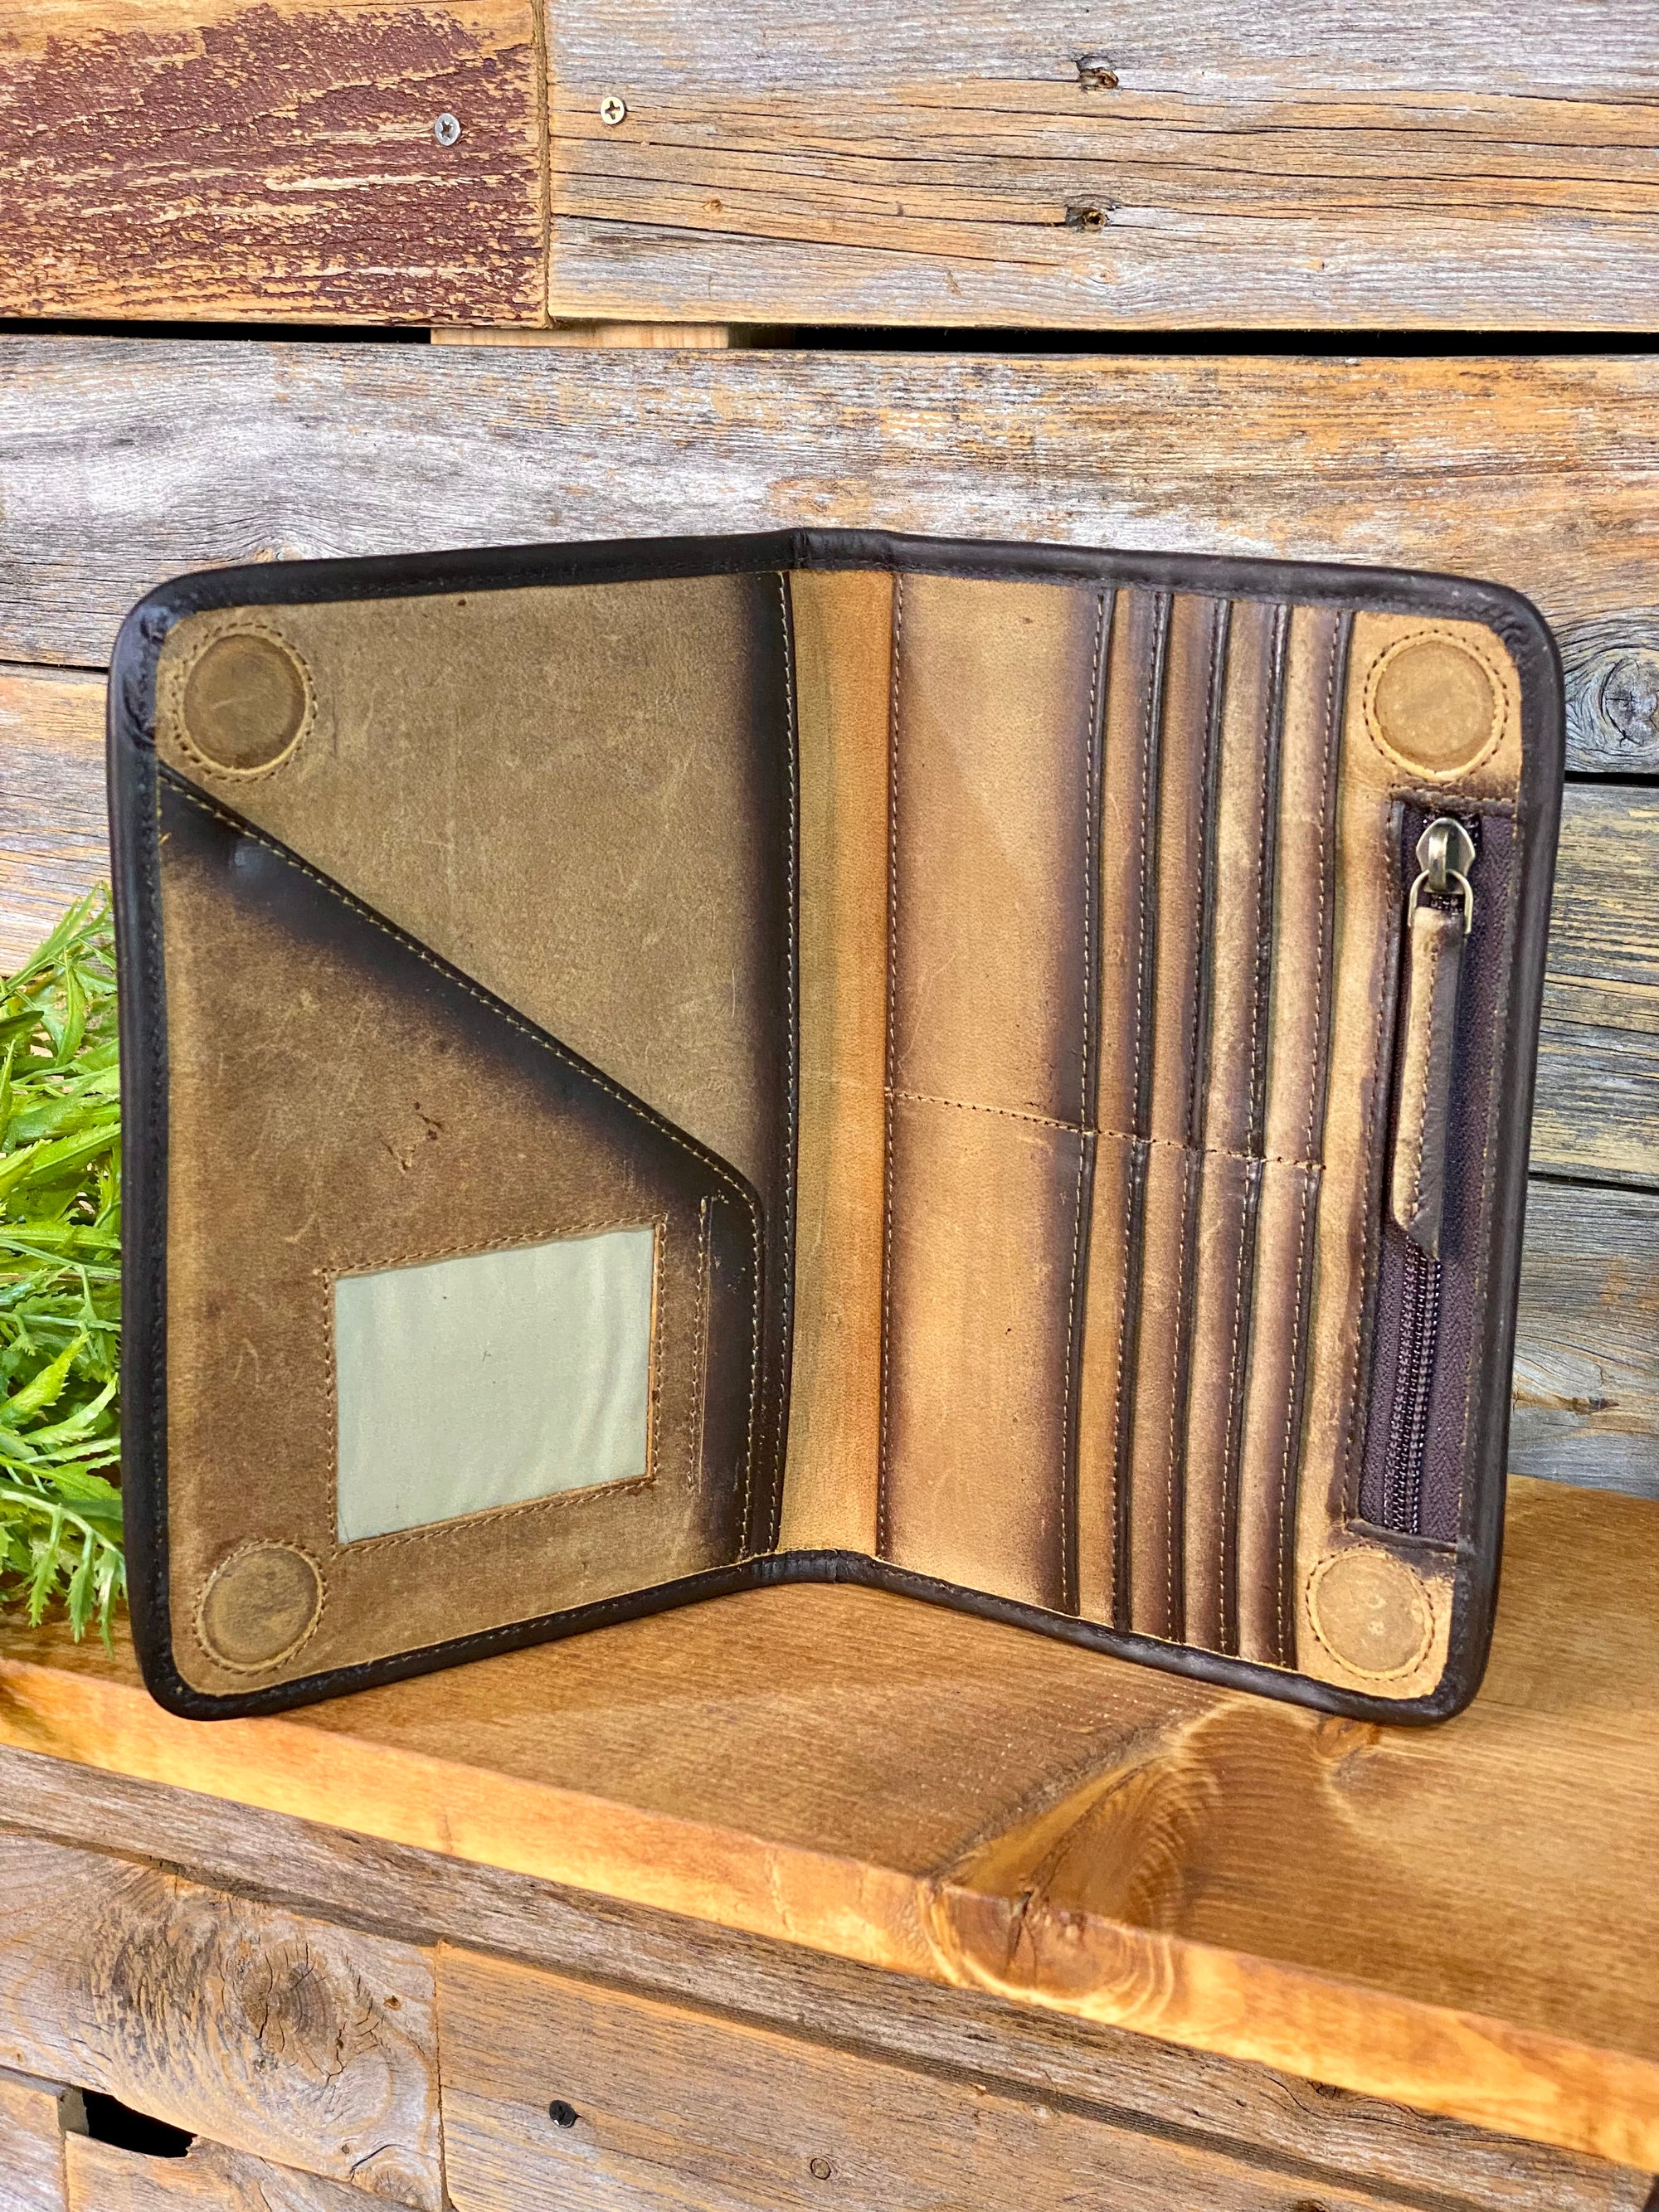 Cowhide Leather Travel Wallet Organizer - Accessorize In Style